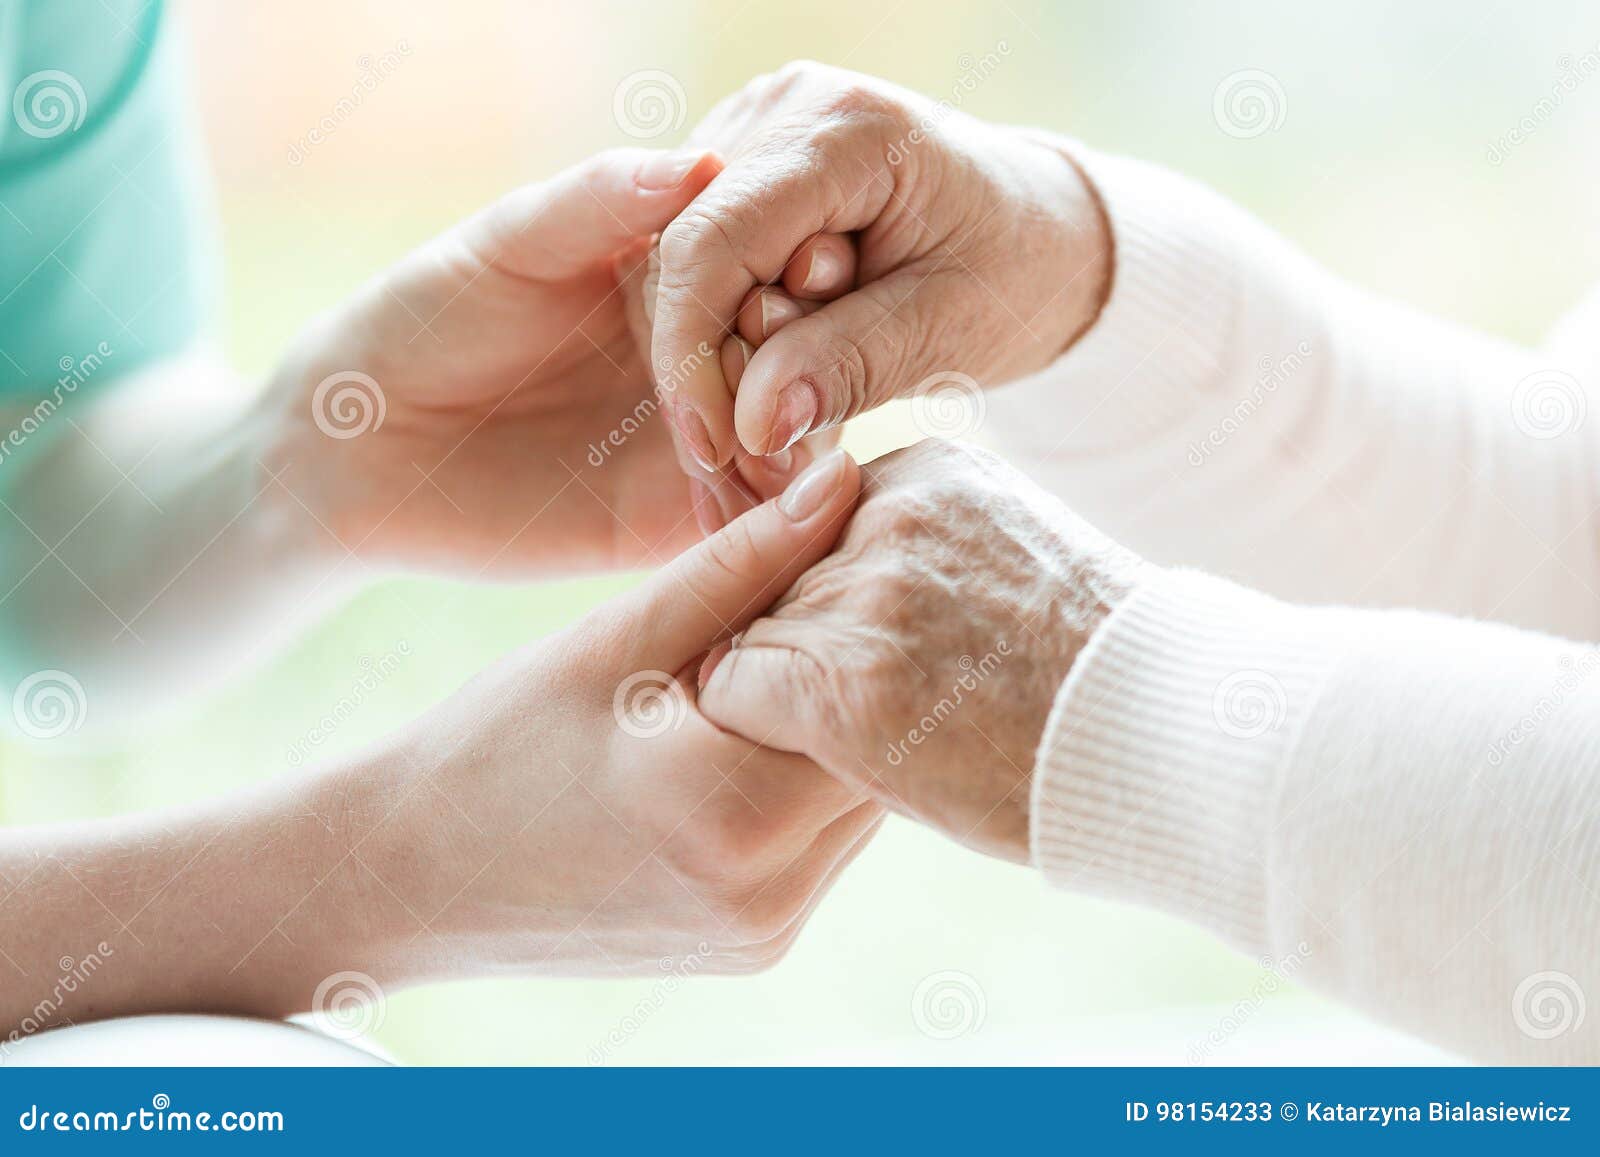 close-up of holding hands